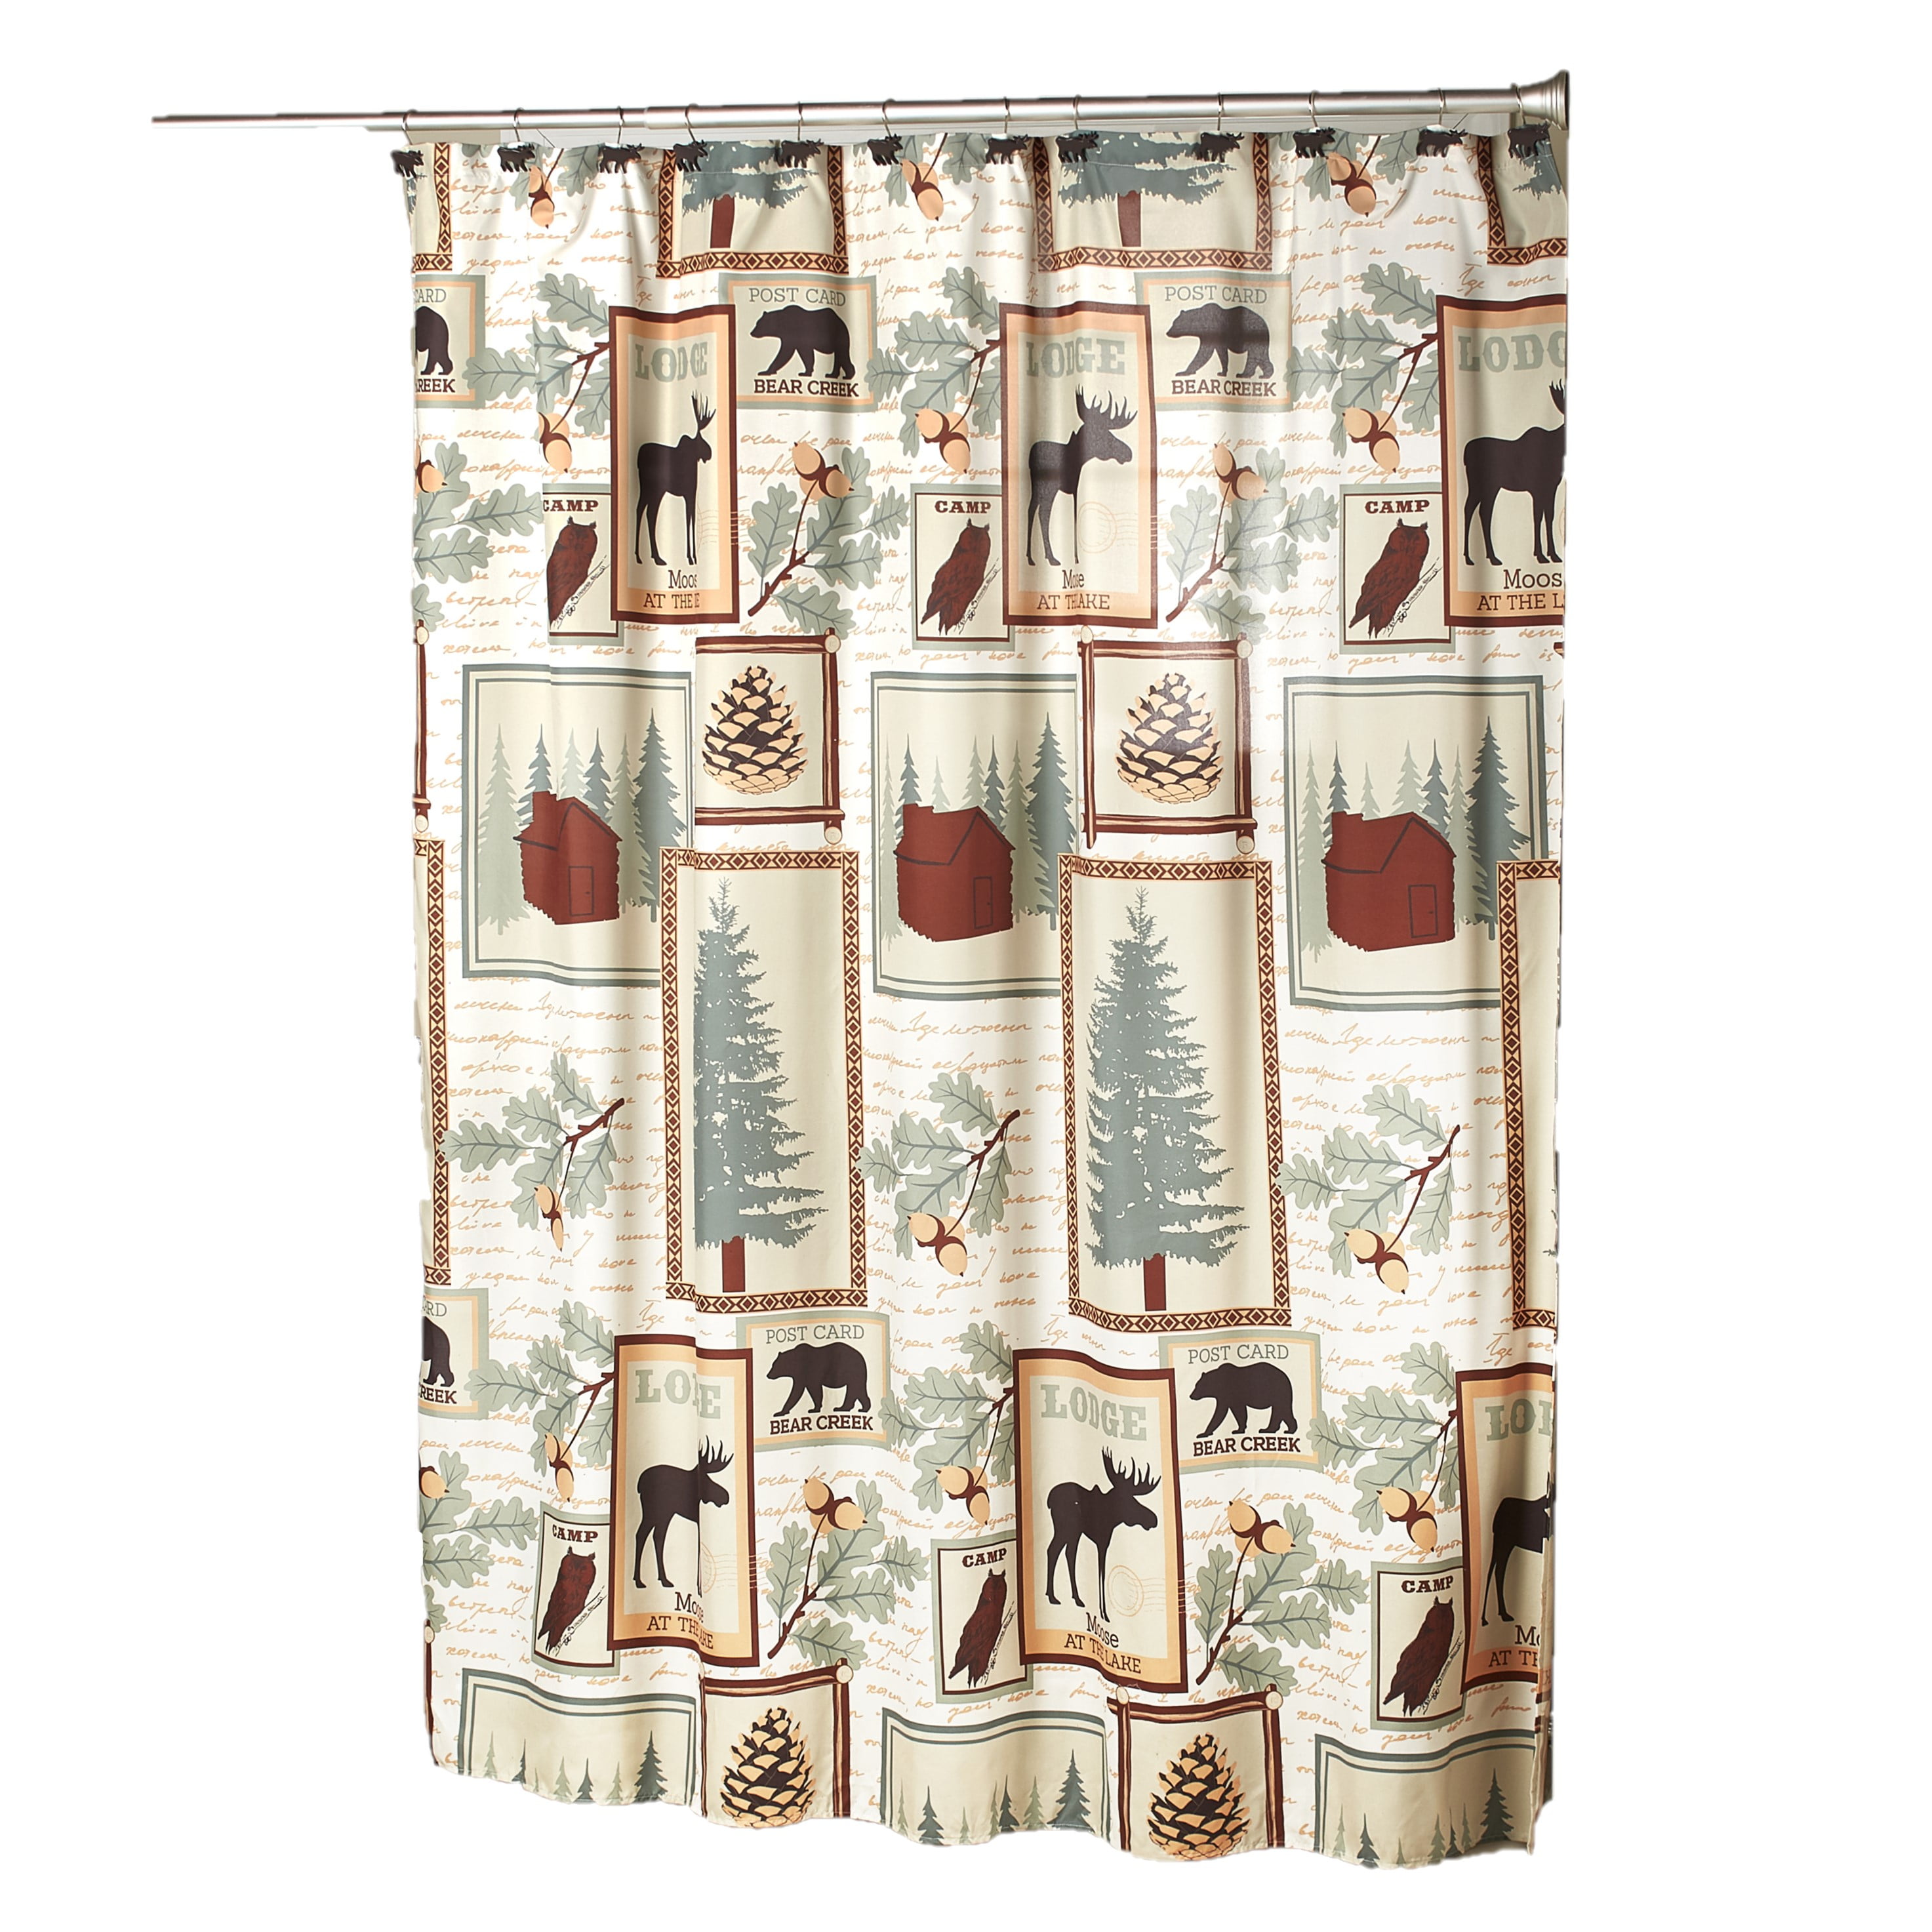 Camping Fabric Shower Curtain 70x72 Lodge Cabin Woods Woodland Northwoods Bear 